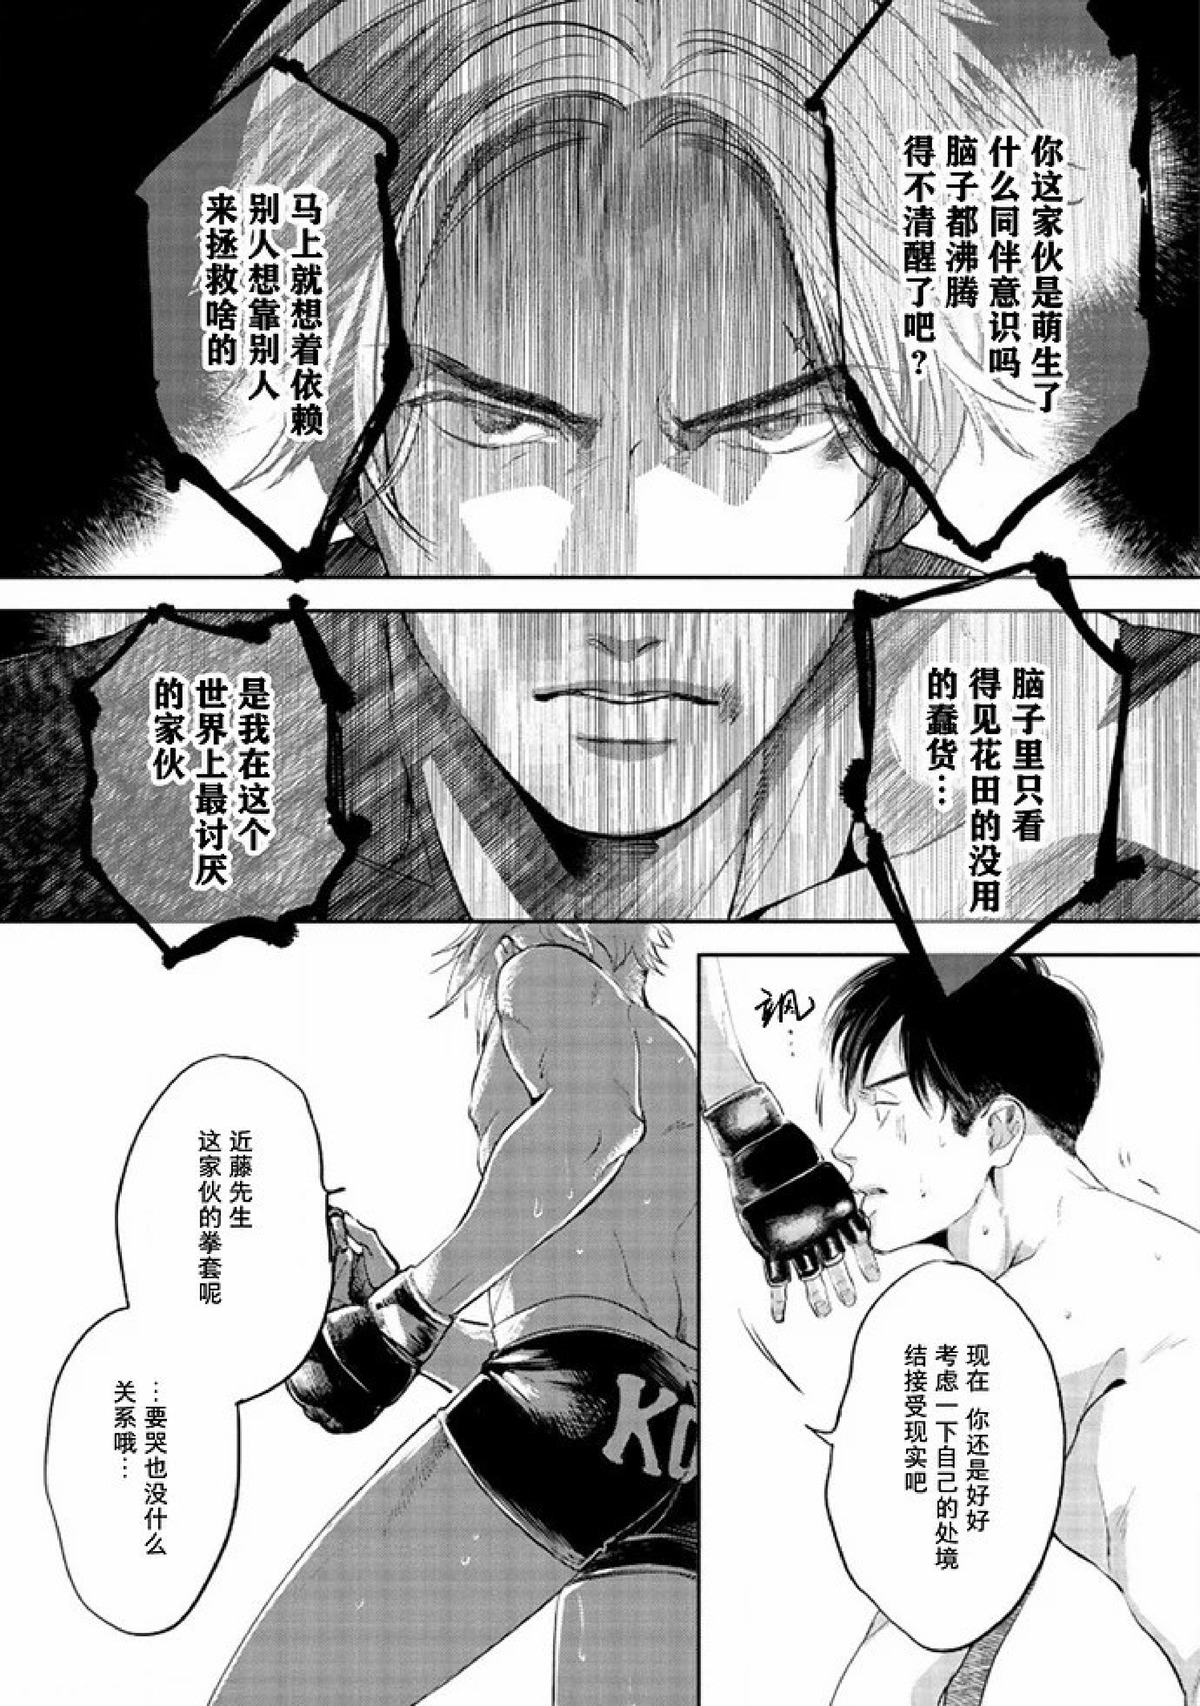 【Two sides of the same coin[耽美]】漫画-（上卷01-02）章节漫画下拉式图片-64.jpg